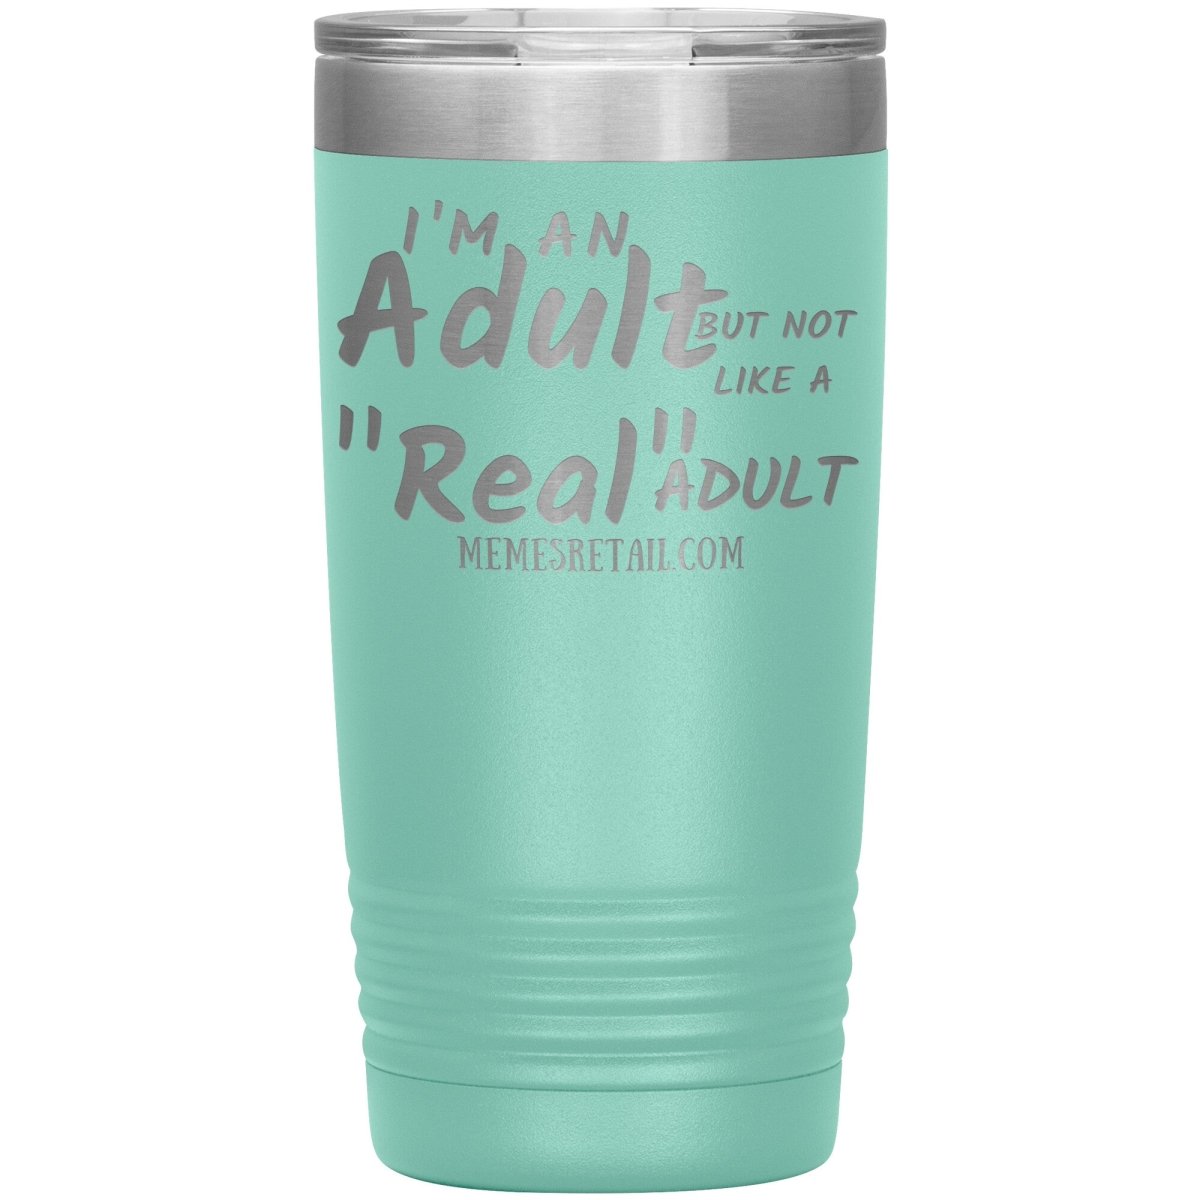 I'm an adult, but not like a "real" adult Tumblers, 20oz Insulated Tumbler / Teal - MemesRetail.com